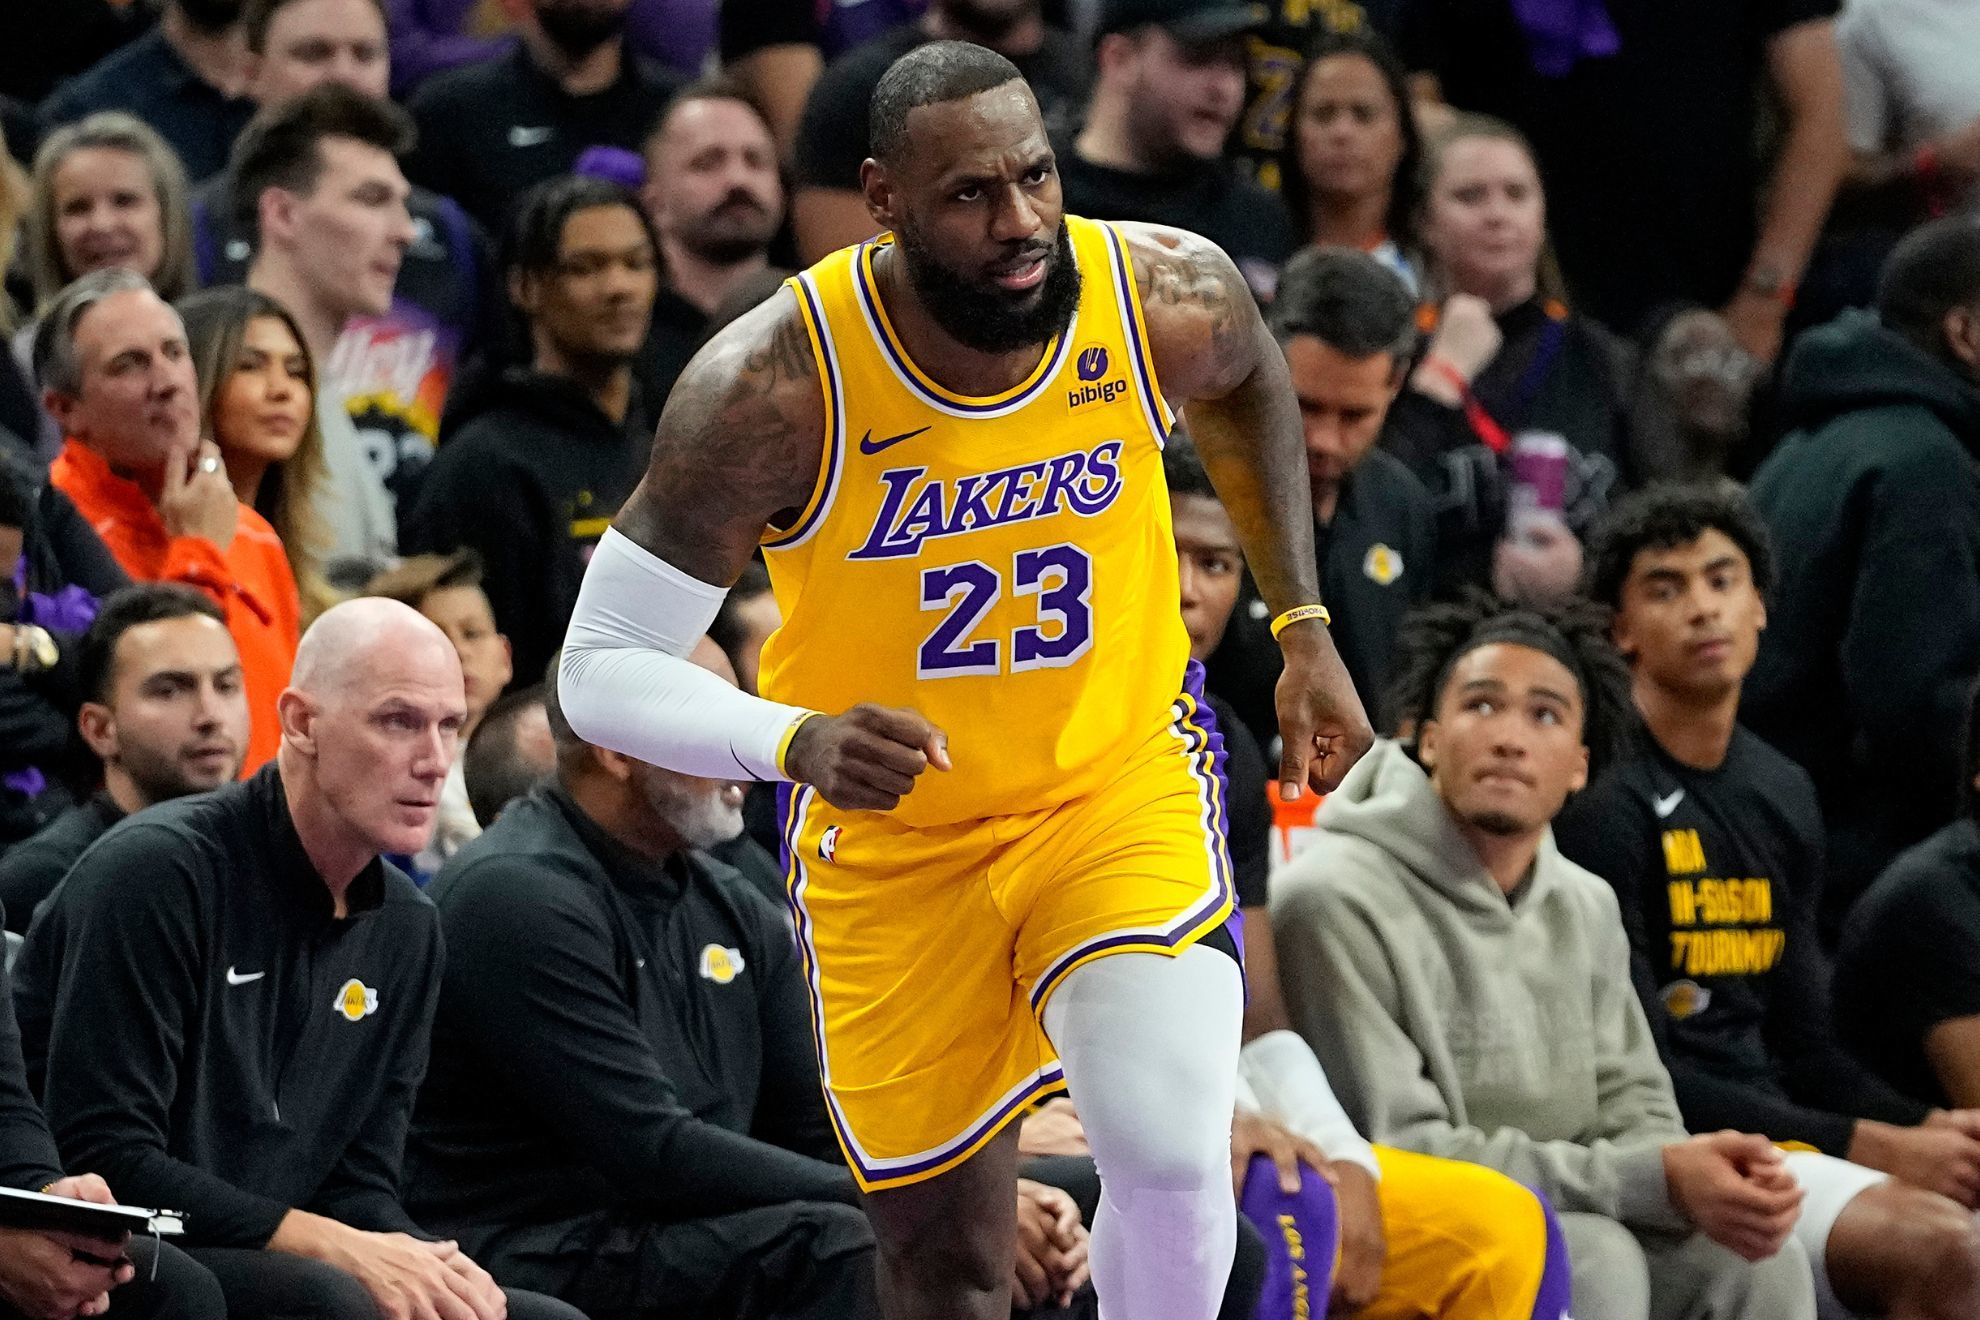 LeBron James survives injury scare, passes Magic Johnson on all-time assists list